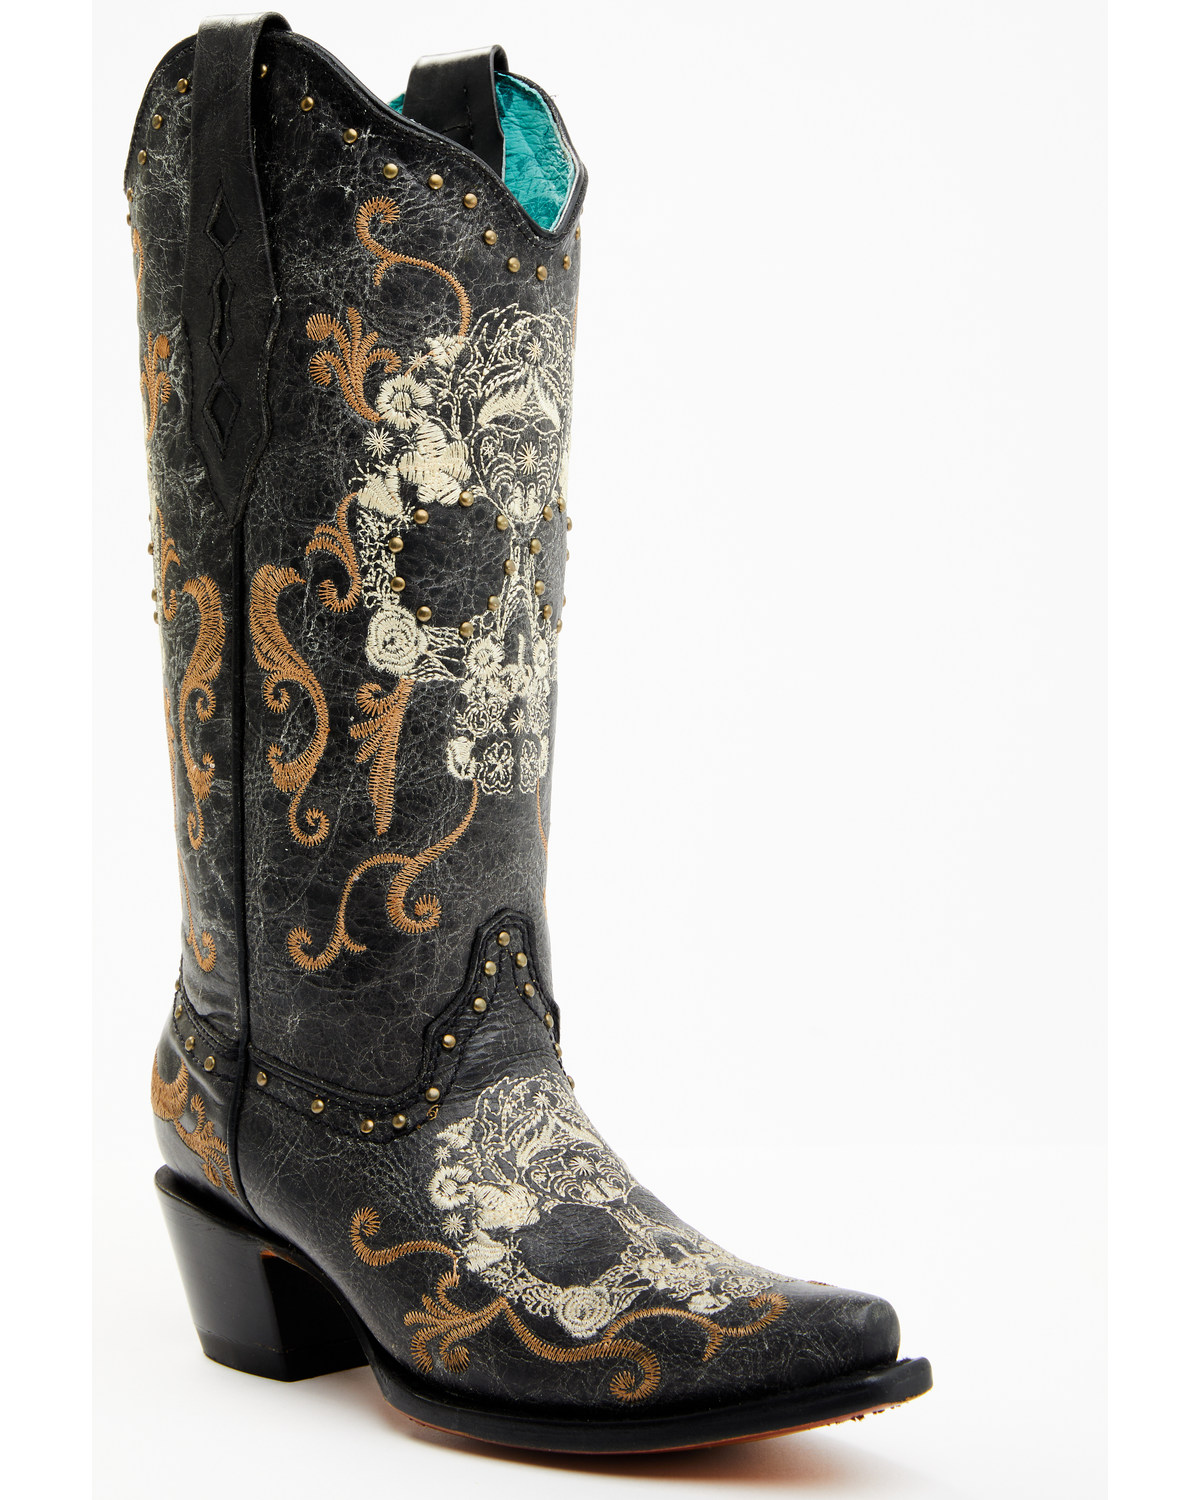 Corral Women's Floral Skull Embroidery & Studs Western Boots - Snip Toe